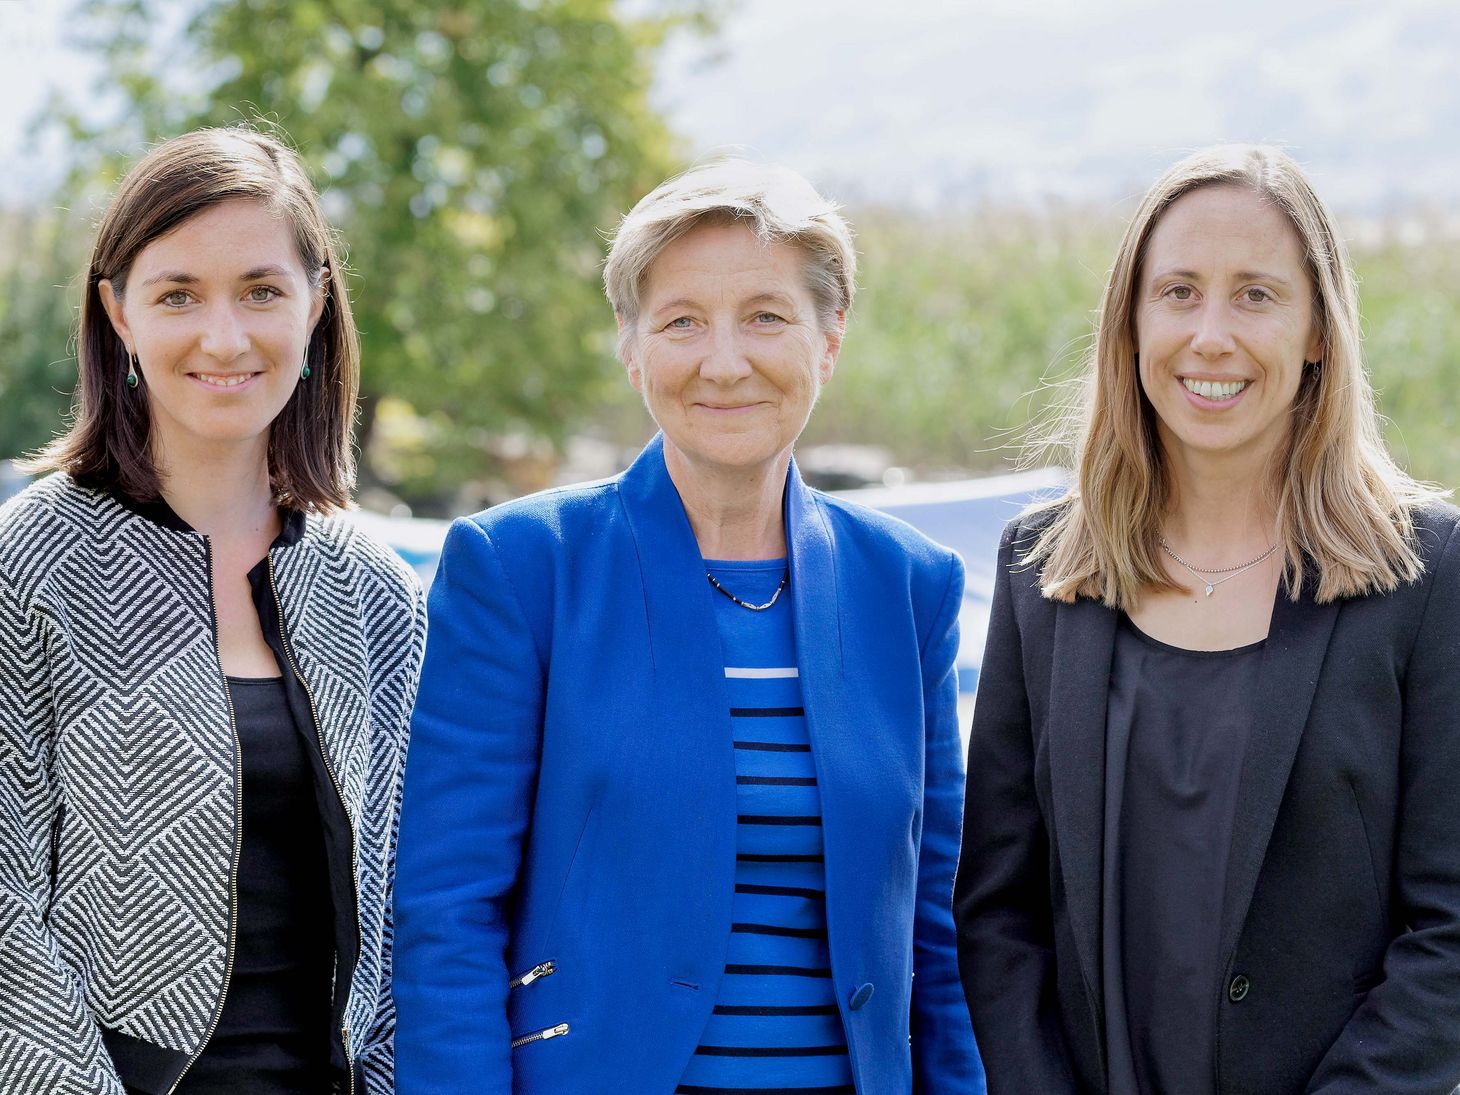 Portrait of Edith Schnapper (career development in technology for western Switzerland), Astrid Hügli (project manager of Swiss TecLadies) and Silvia Kraus (marketing manager of career development).